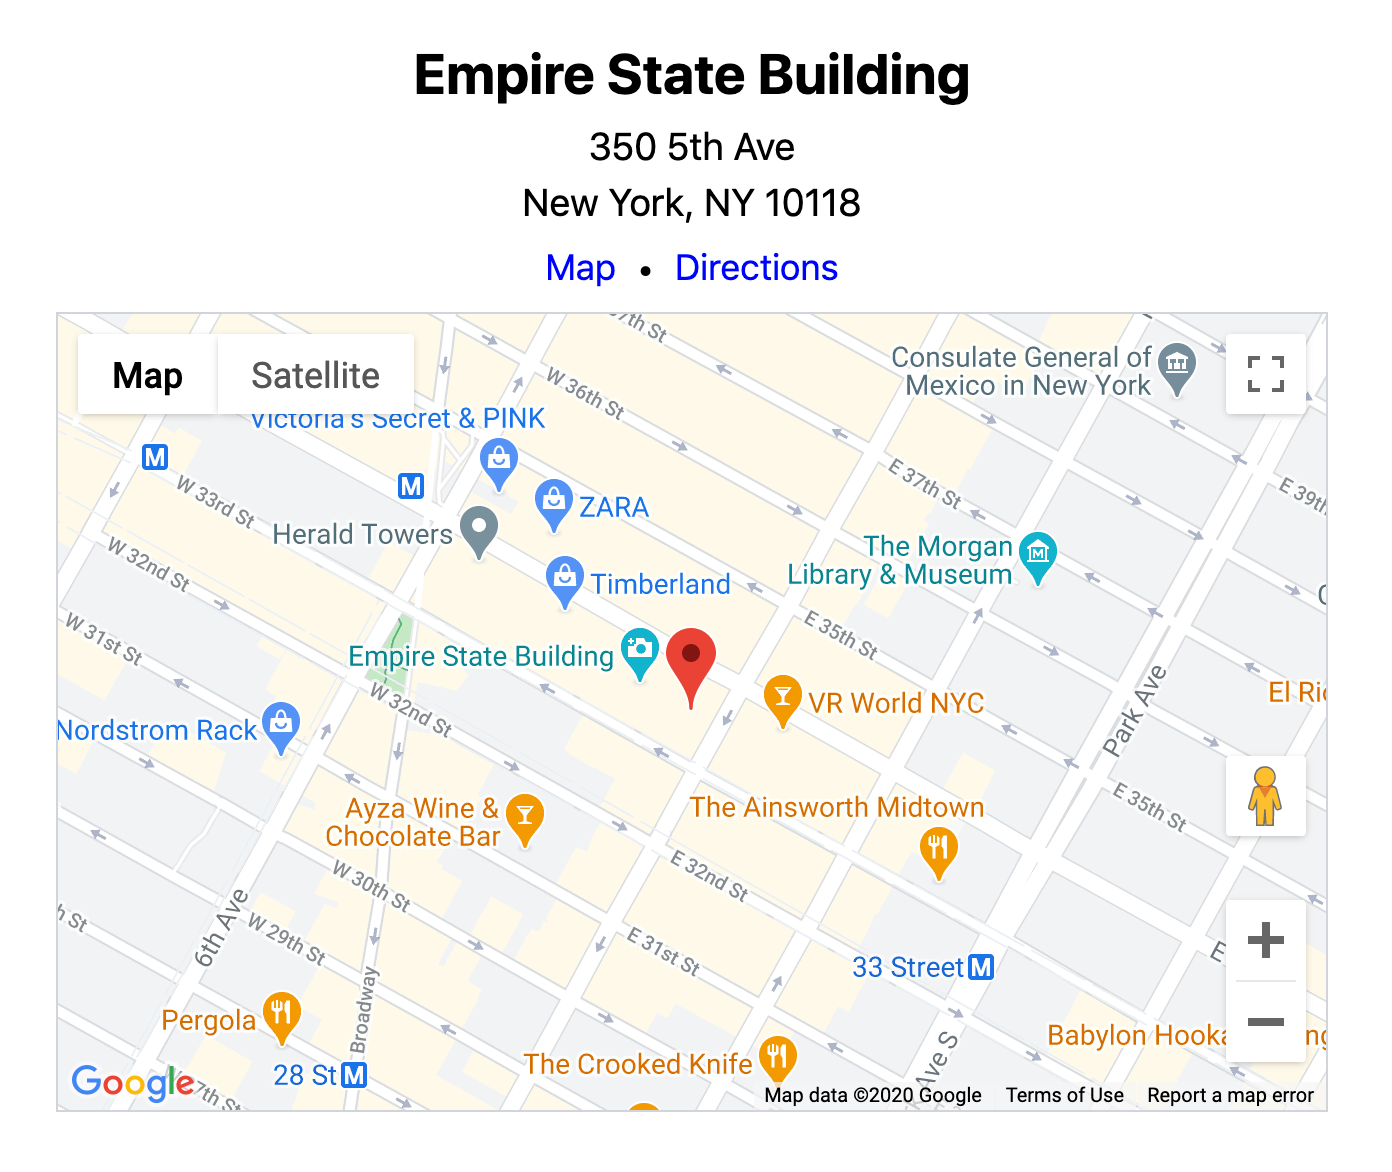 Example using the address of the Empire State Building